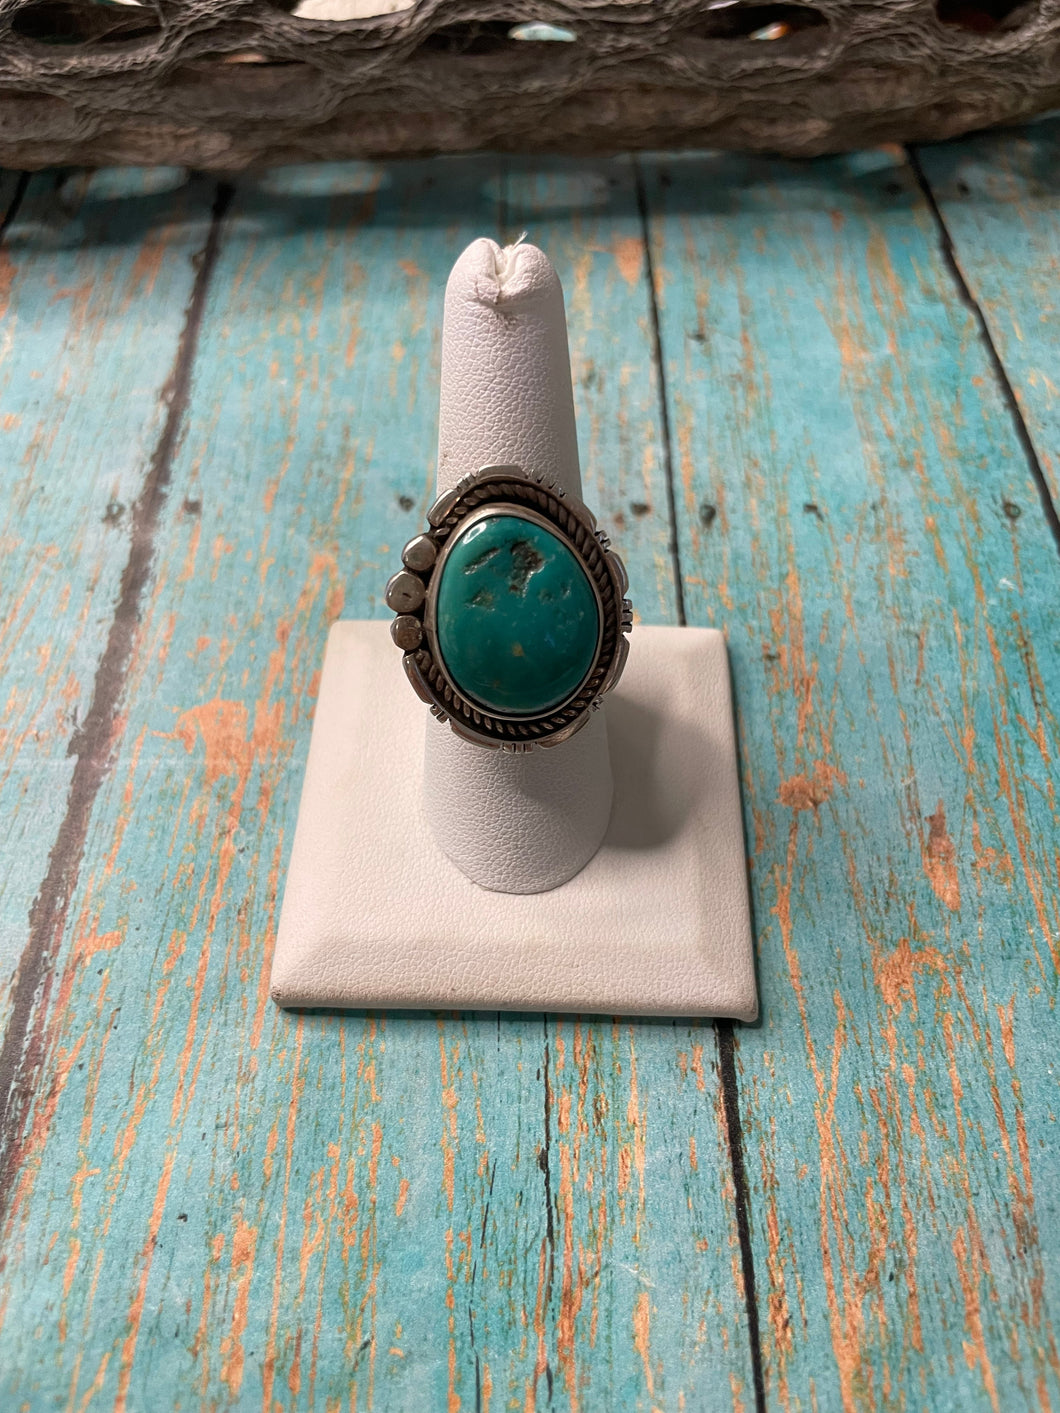 Old Pawn Navajo Sterling Silver & Turquoise Ring Size 8